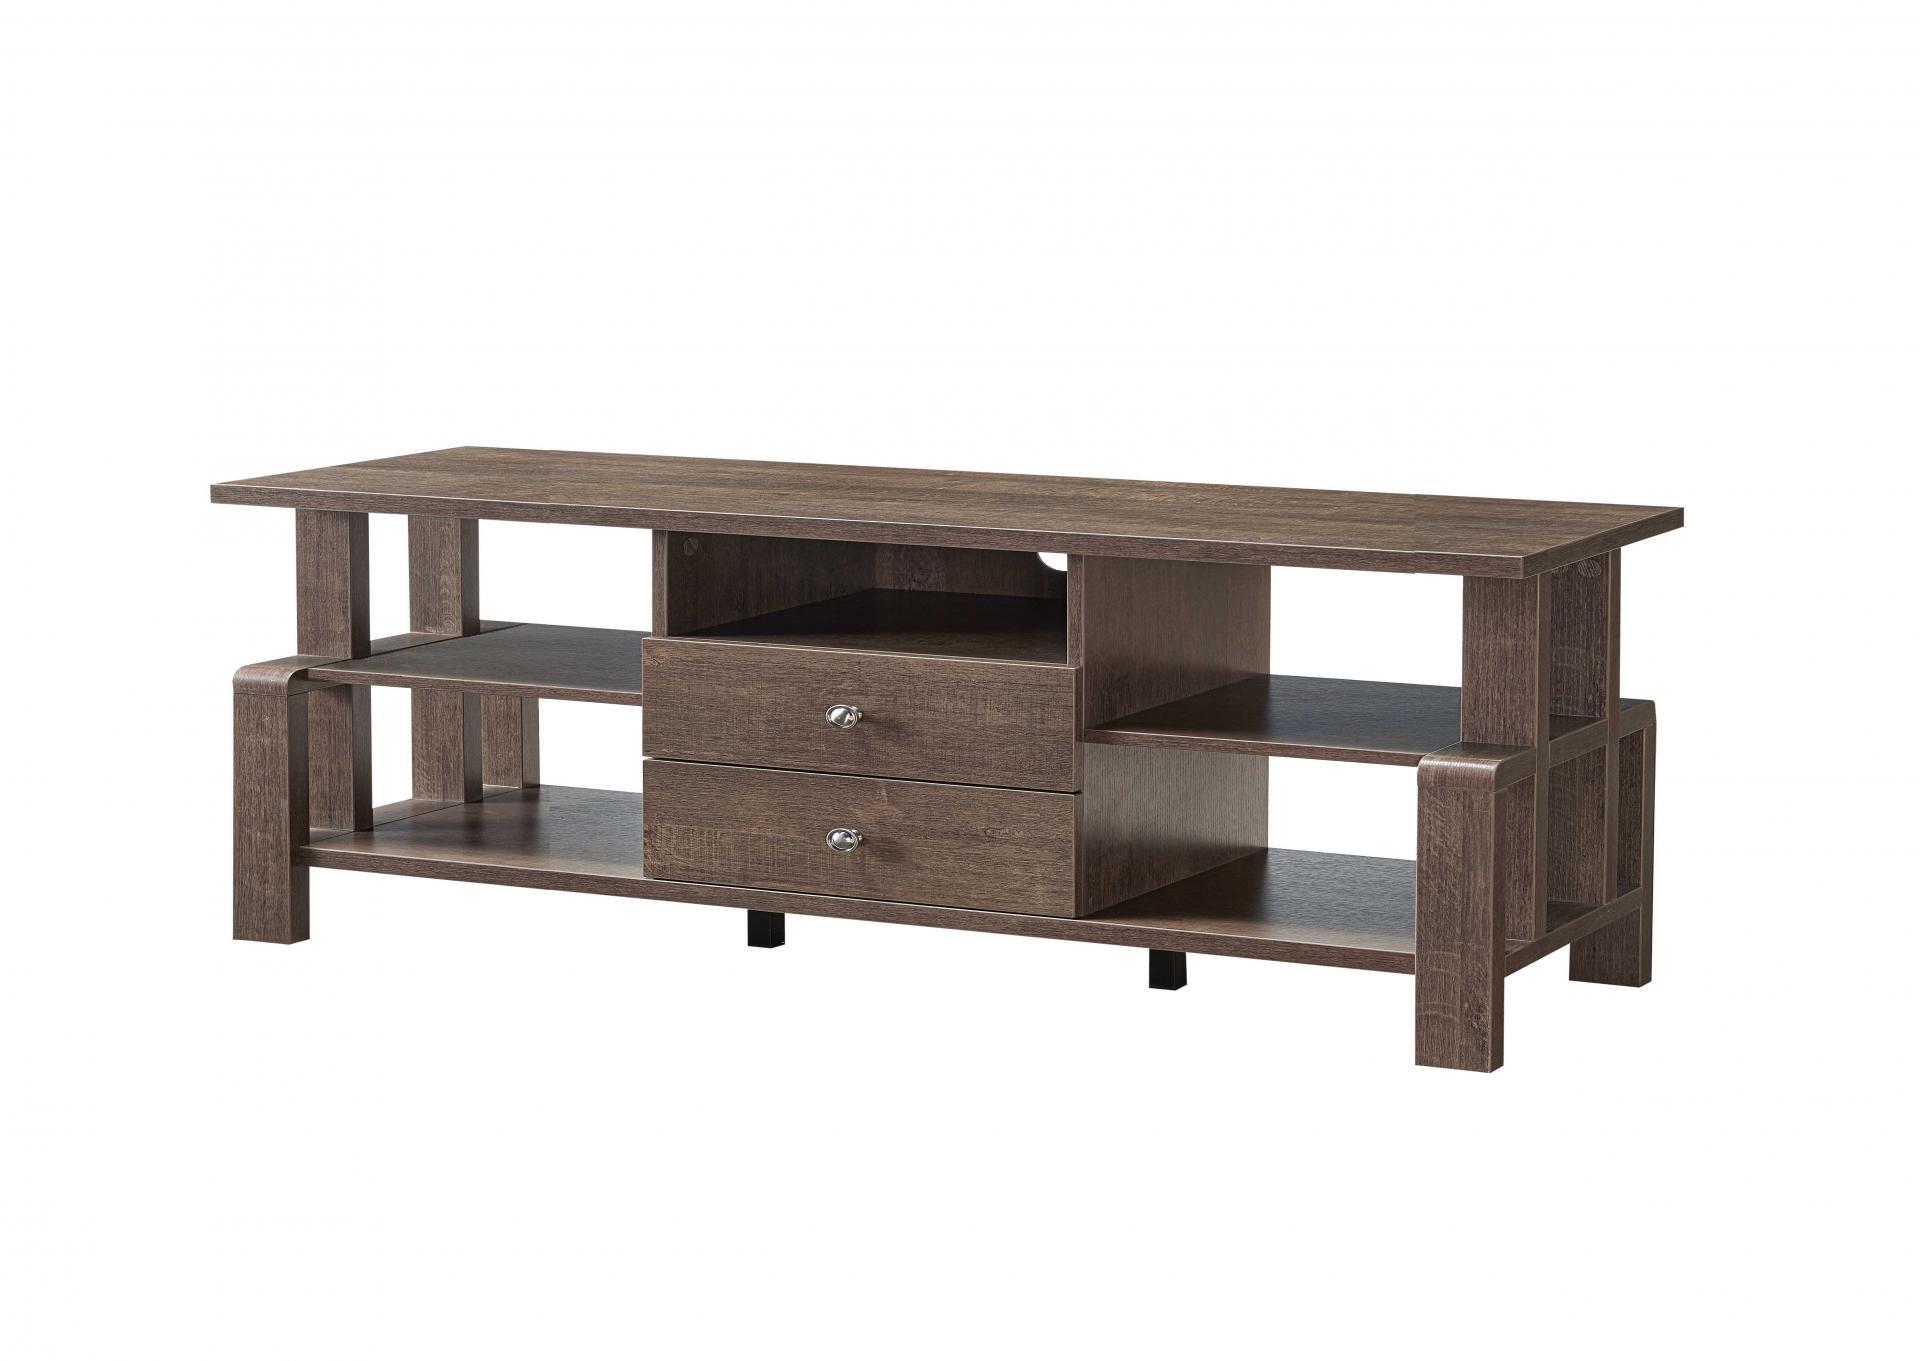 Walnut Oak Tv Stand with 2 drawers